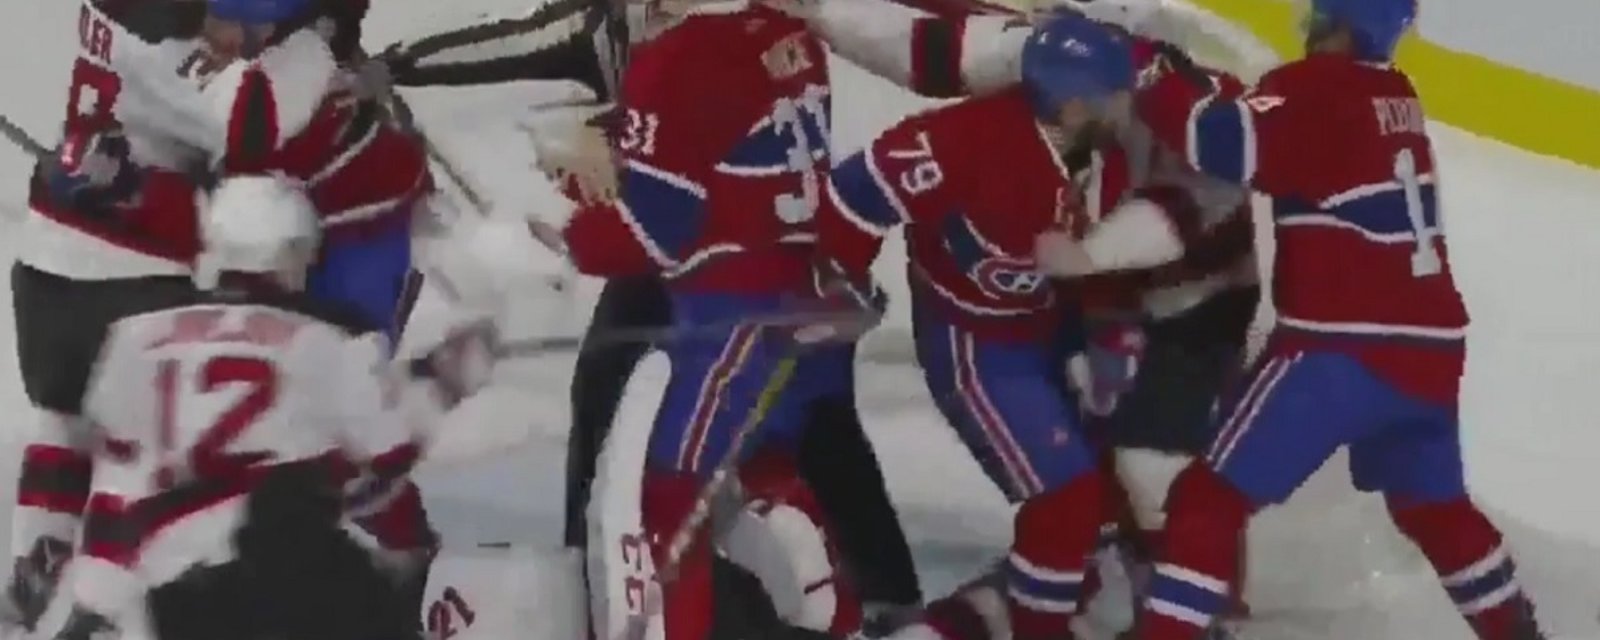 Breaking: Carey Price throws punches and all hell breaks loose!